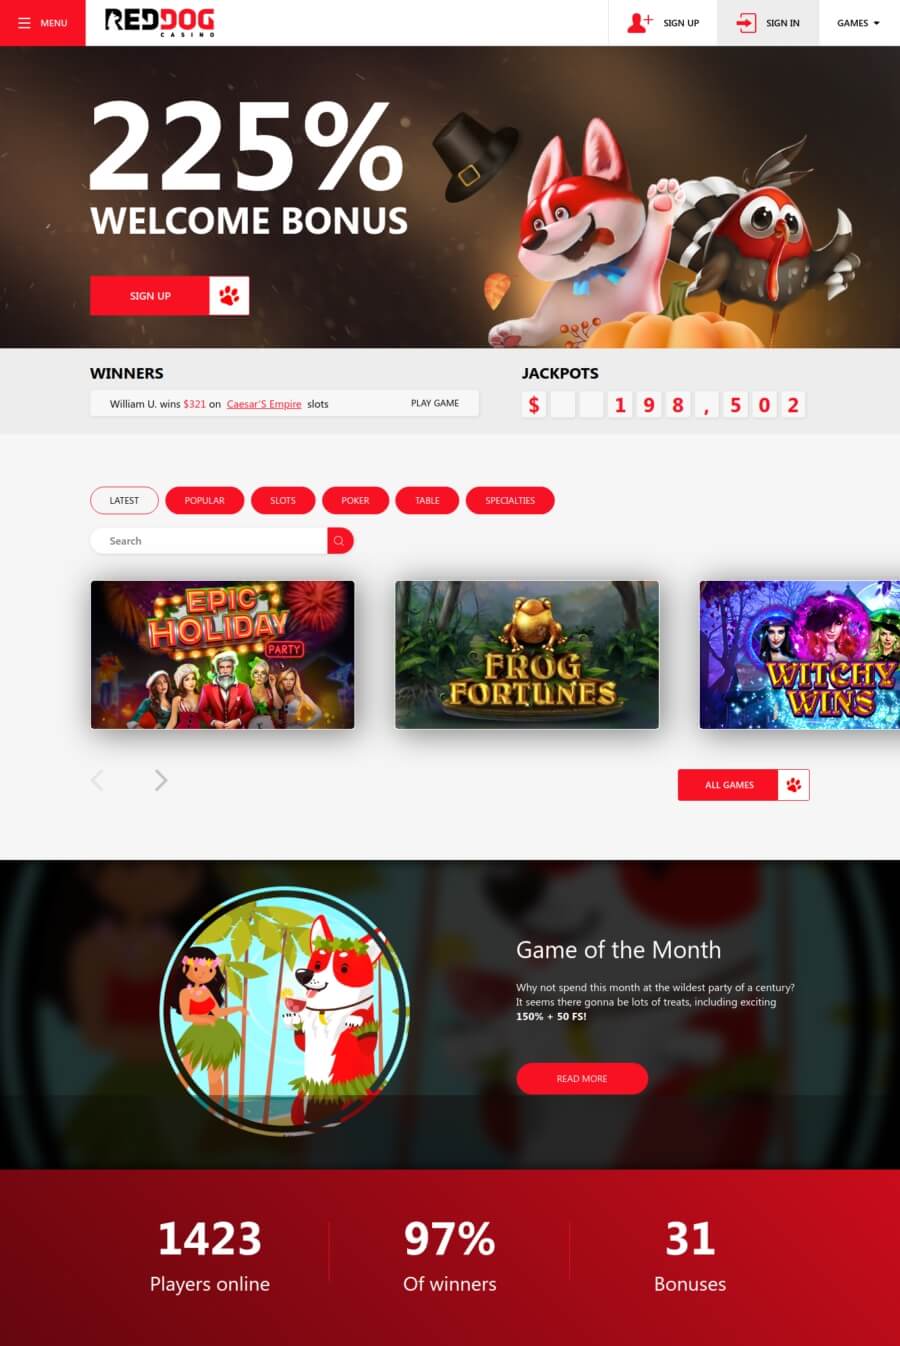 Red Dog Online Casino Play with 225% Welcome Bonus